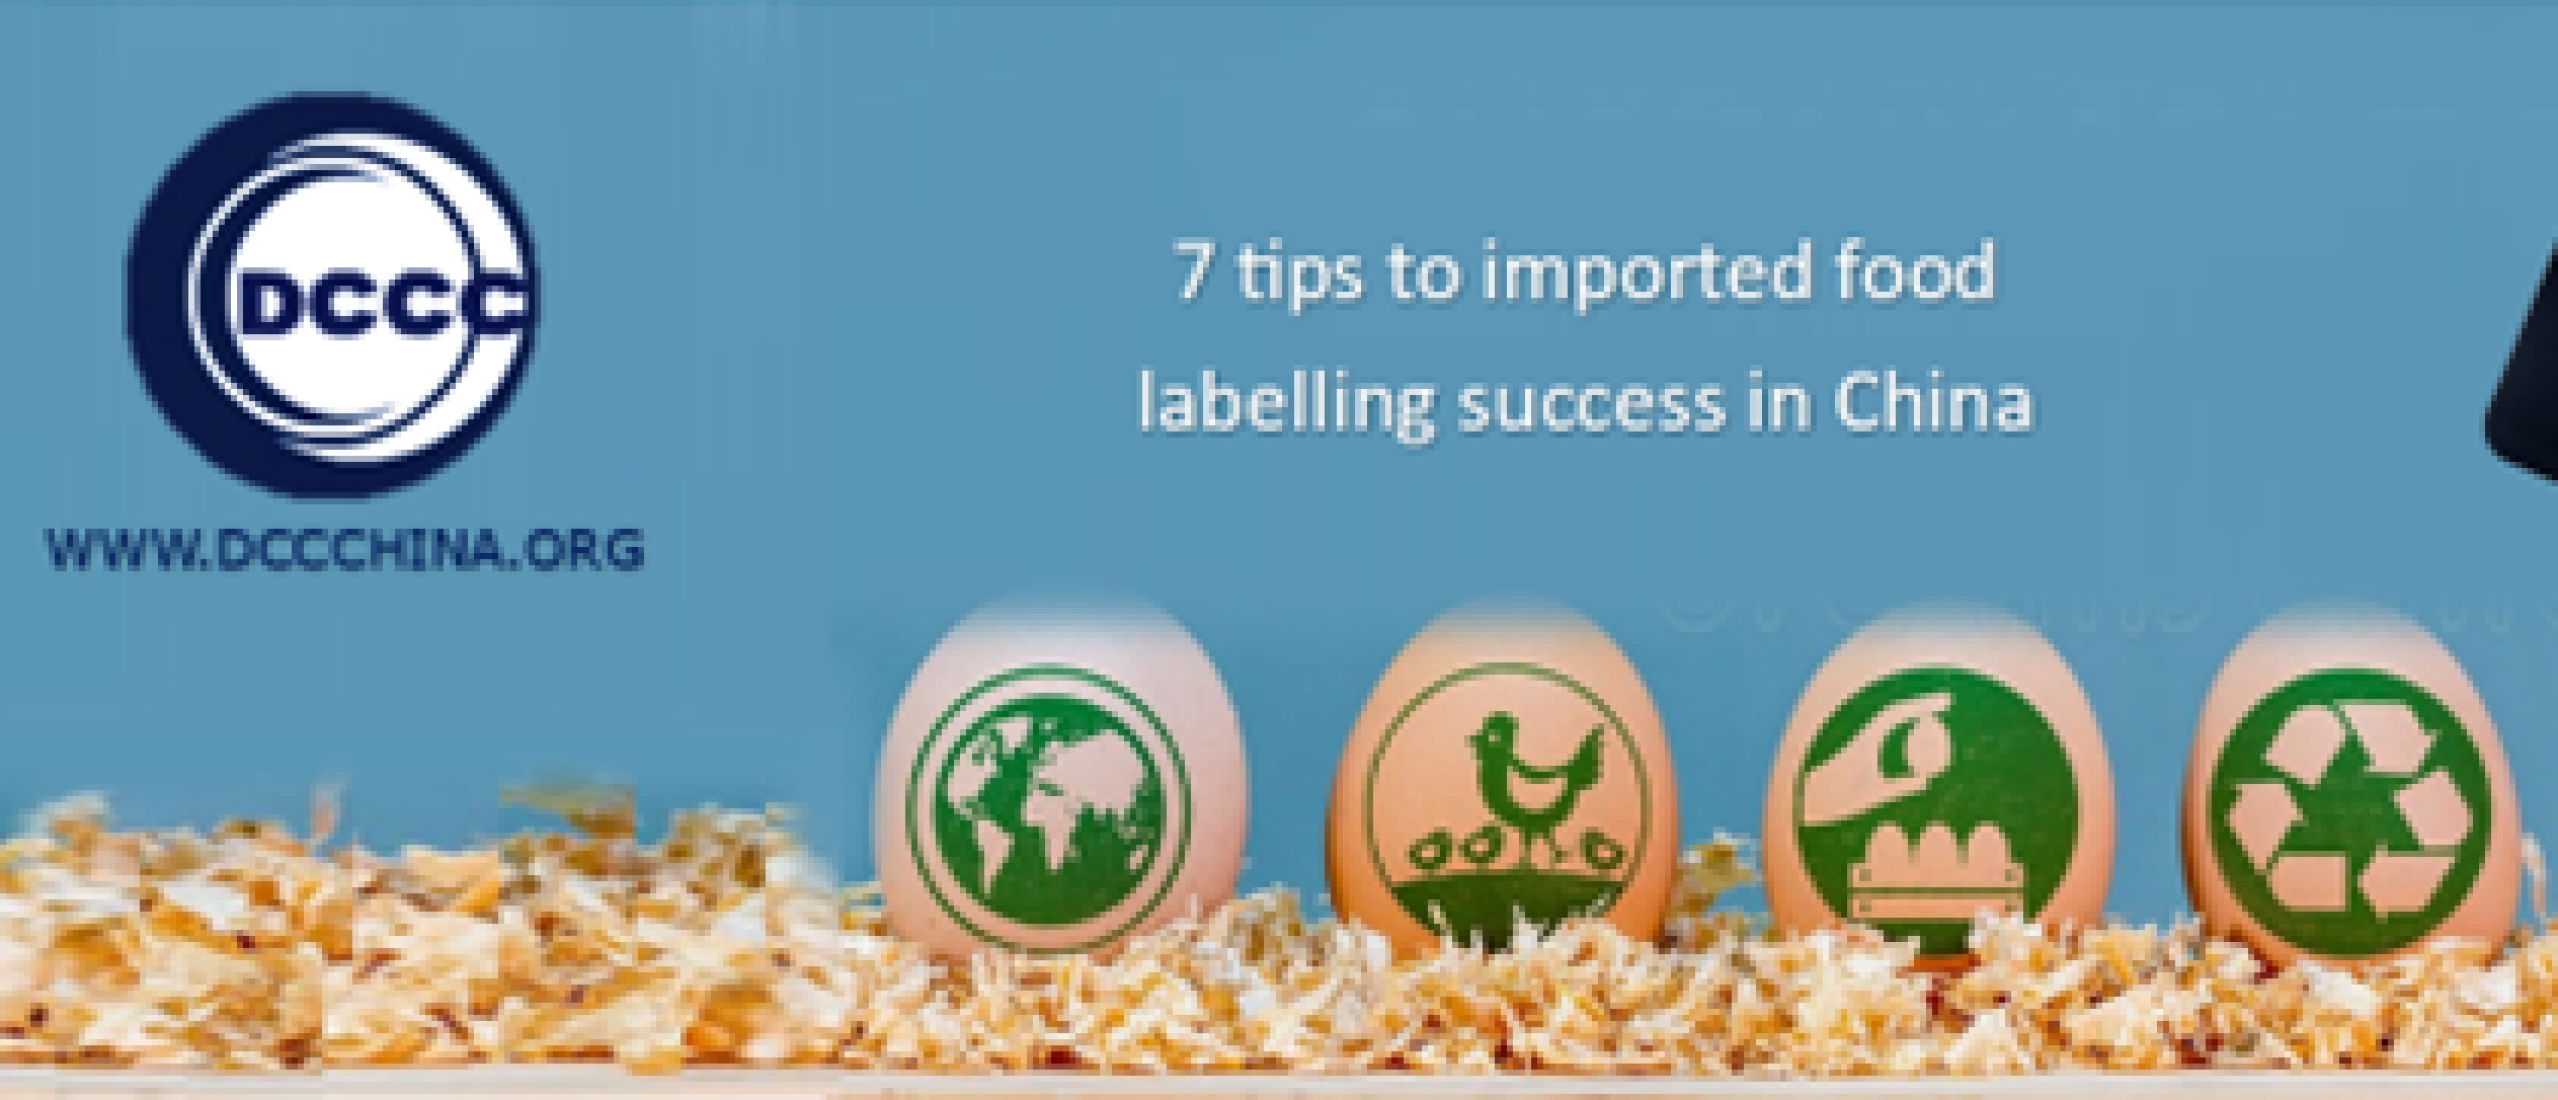 7 tips to imported food labelling success in China